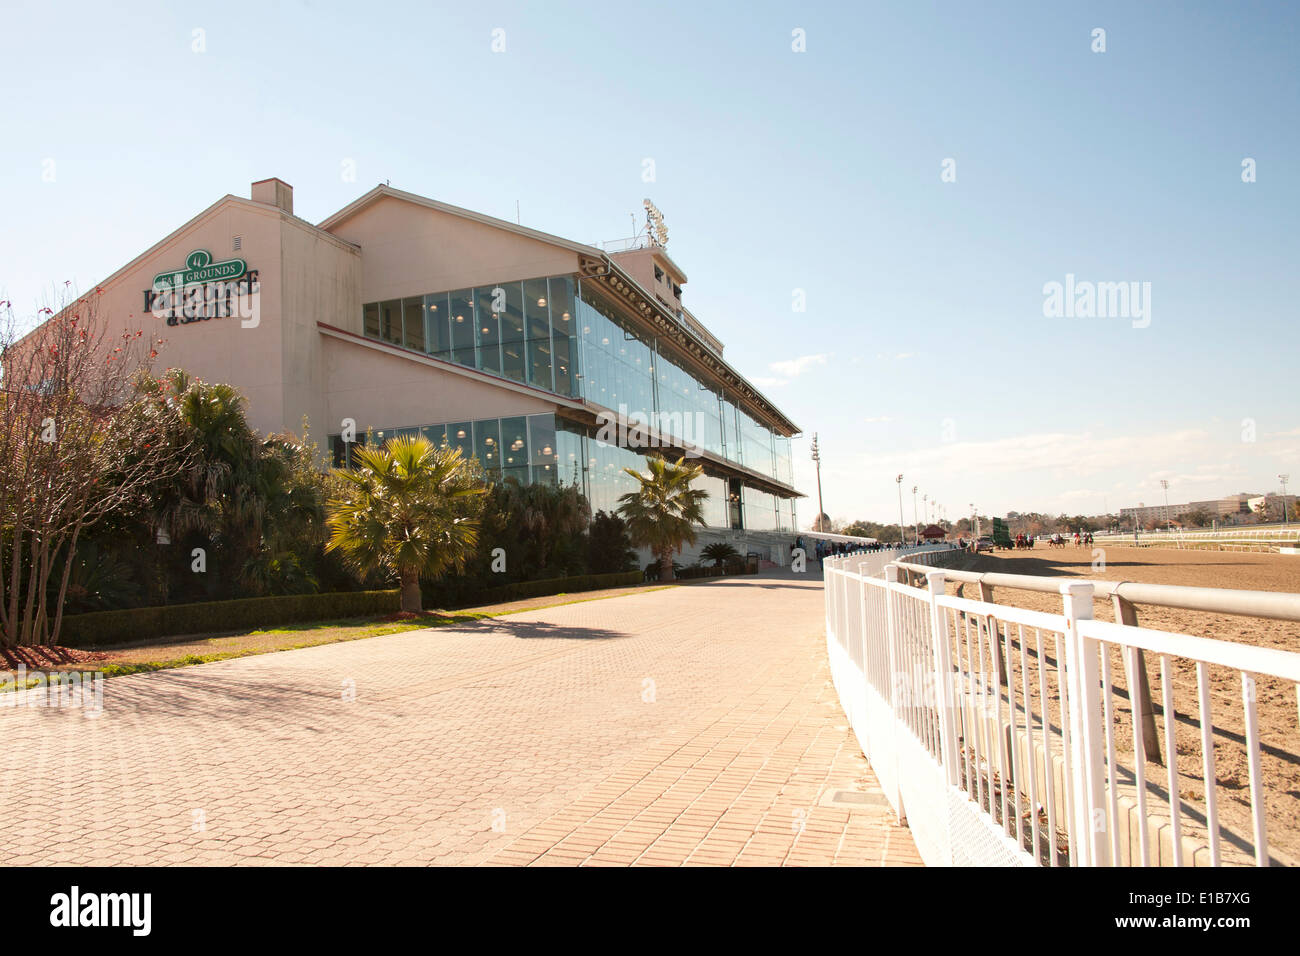 Clubhouse at Fairgrounds Race Course in New Orleans, Louisiana Stock Photo